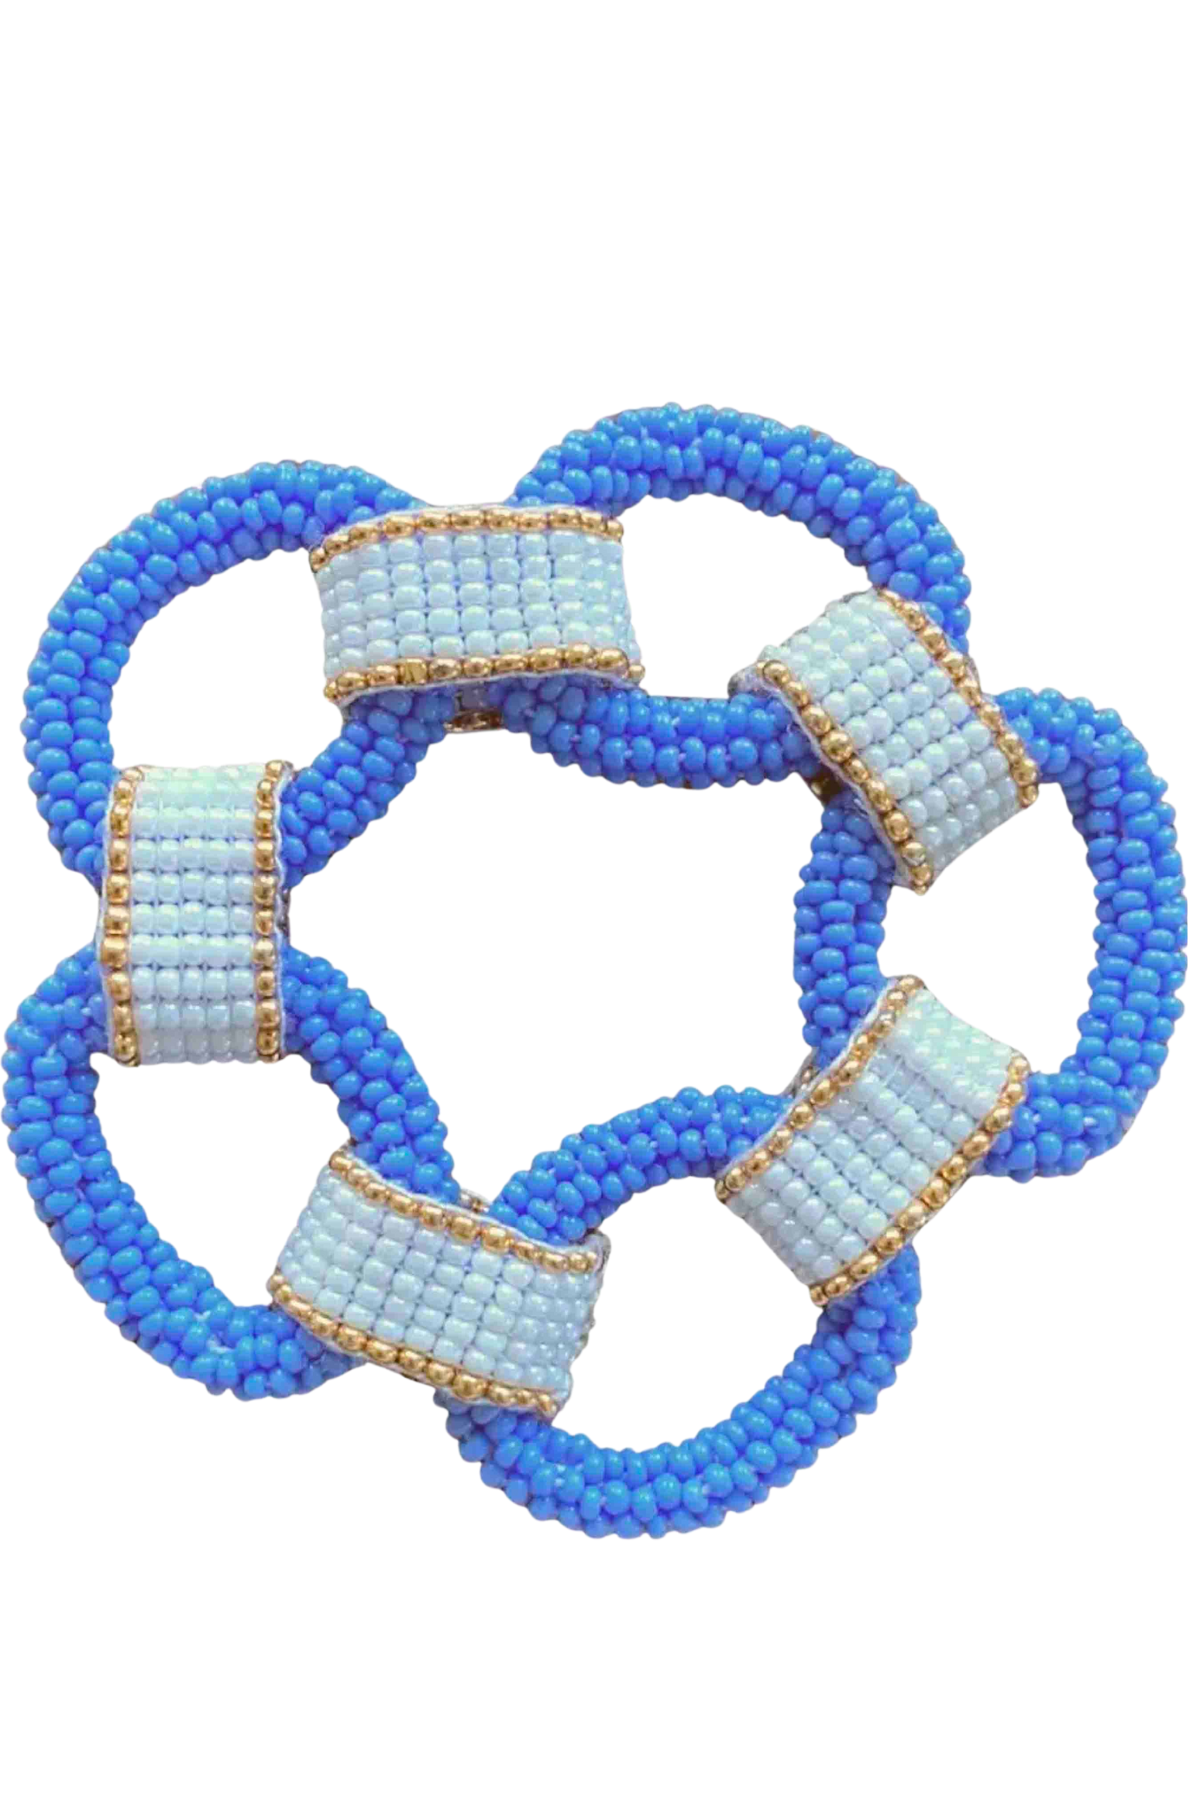 Periwinkle Blue Links Beaded Bracelet by Beth Ladd Collections